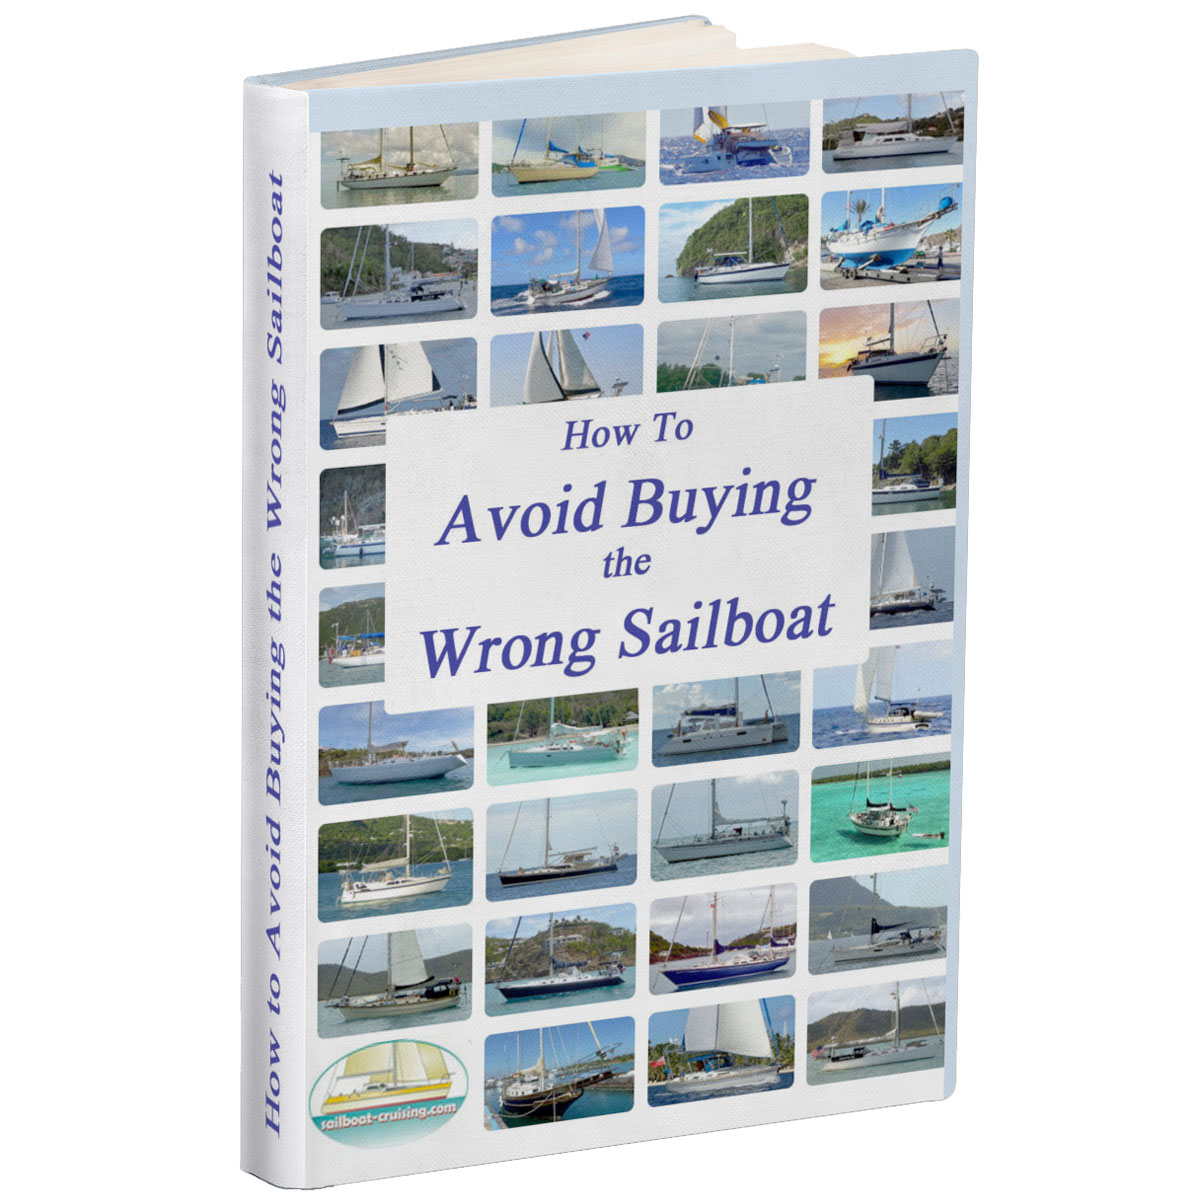 eBook: How to Avoid Buying the Wong Sailboat